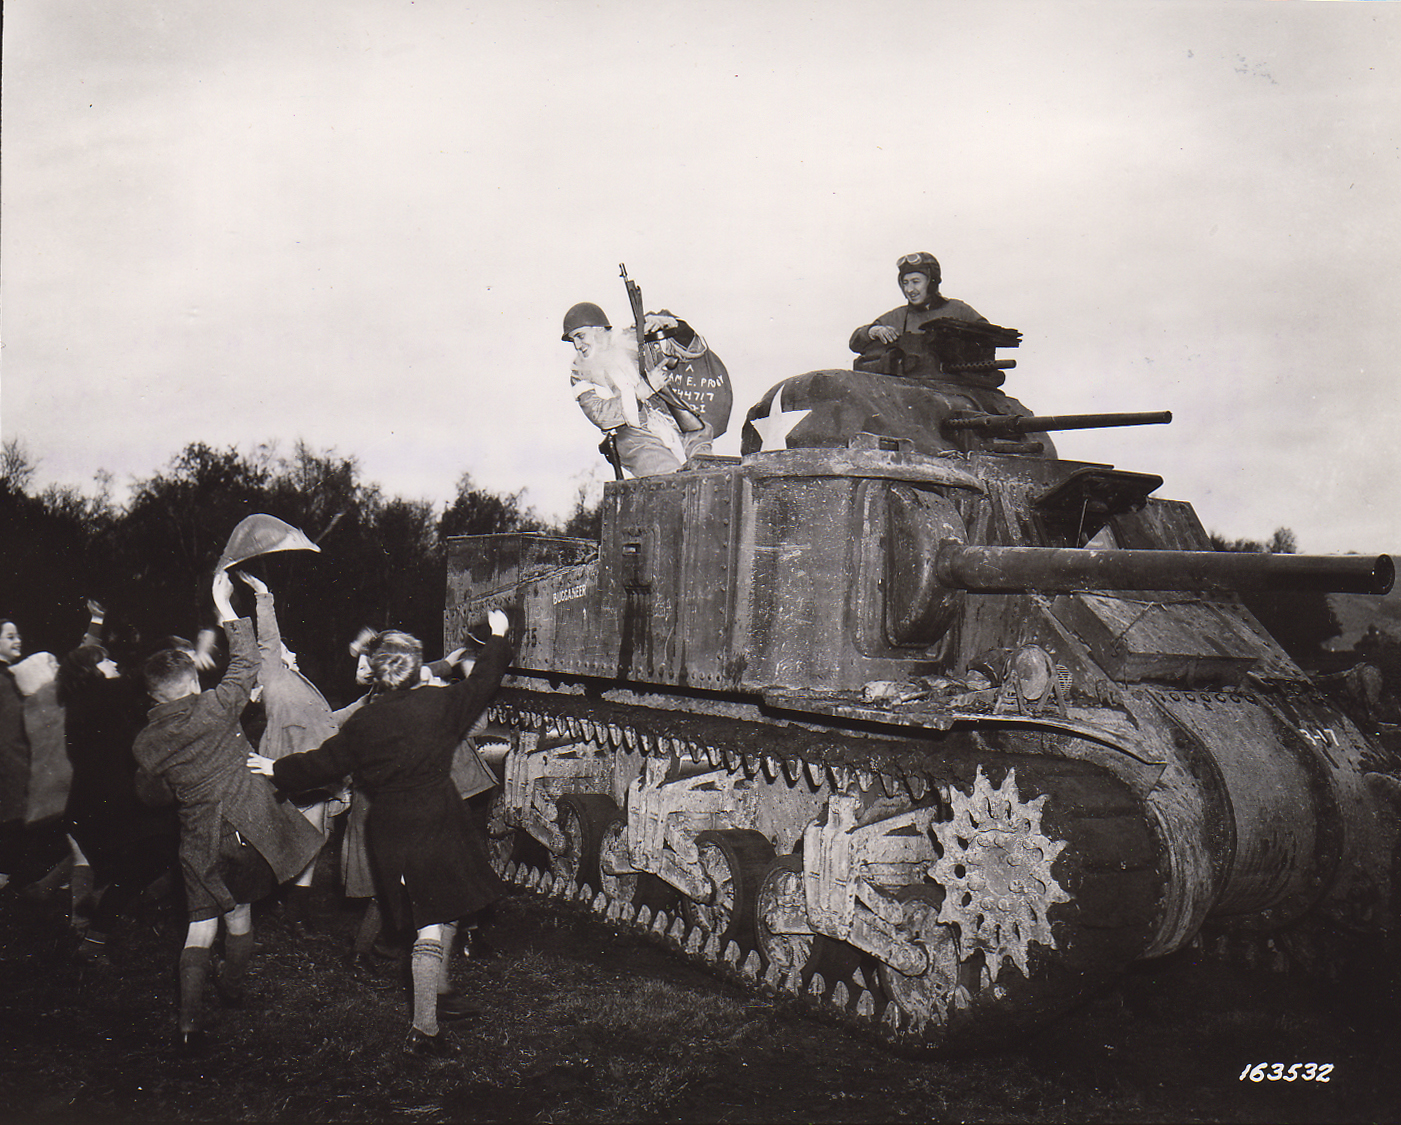 Sgt. Hiram Prouty of US 175th Infantry Regiment dressed as Santa Claus arriving on a M3 medium tank in Perham Down, England, 12/5/1942